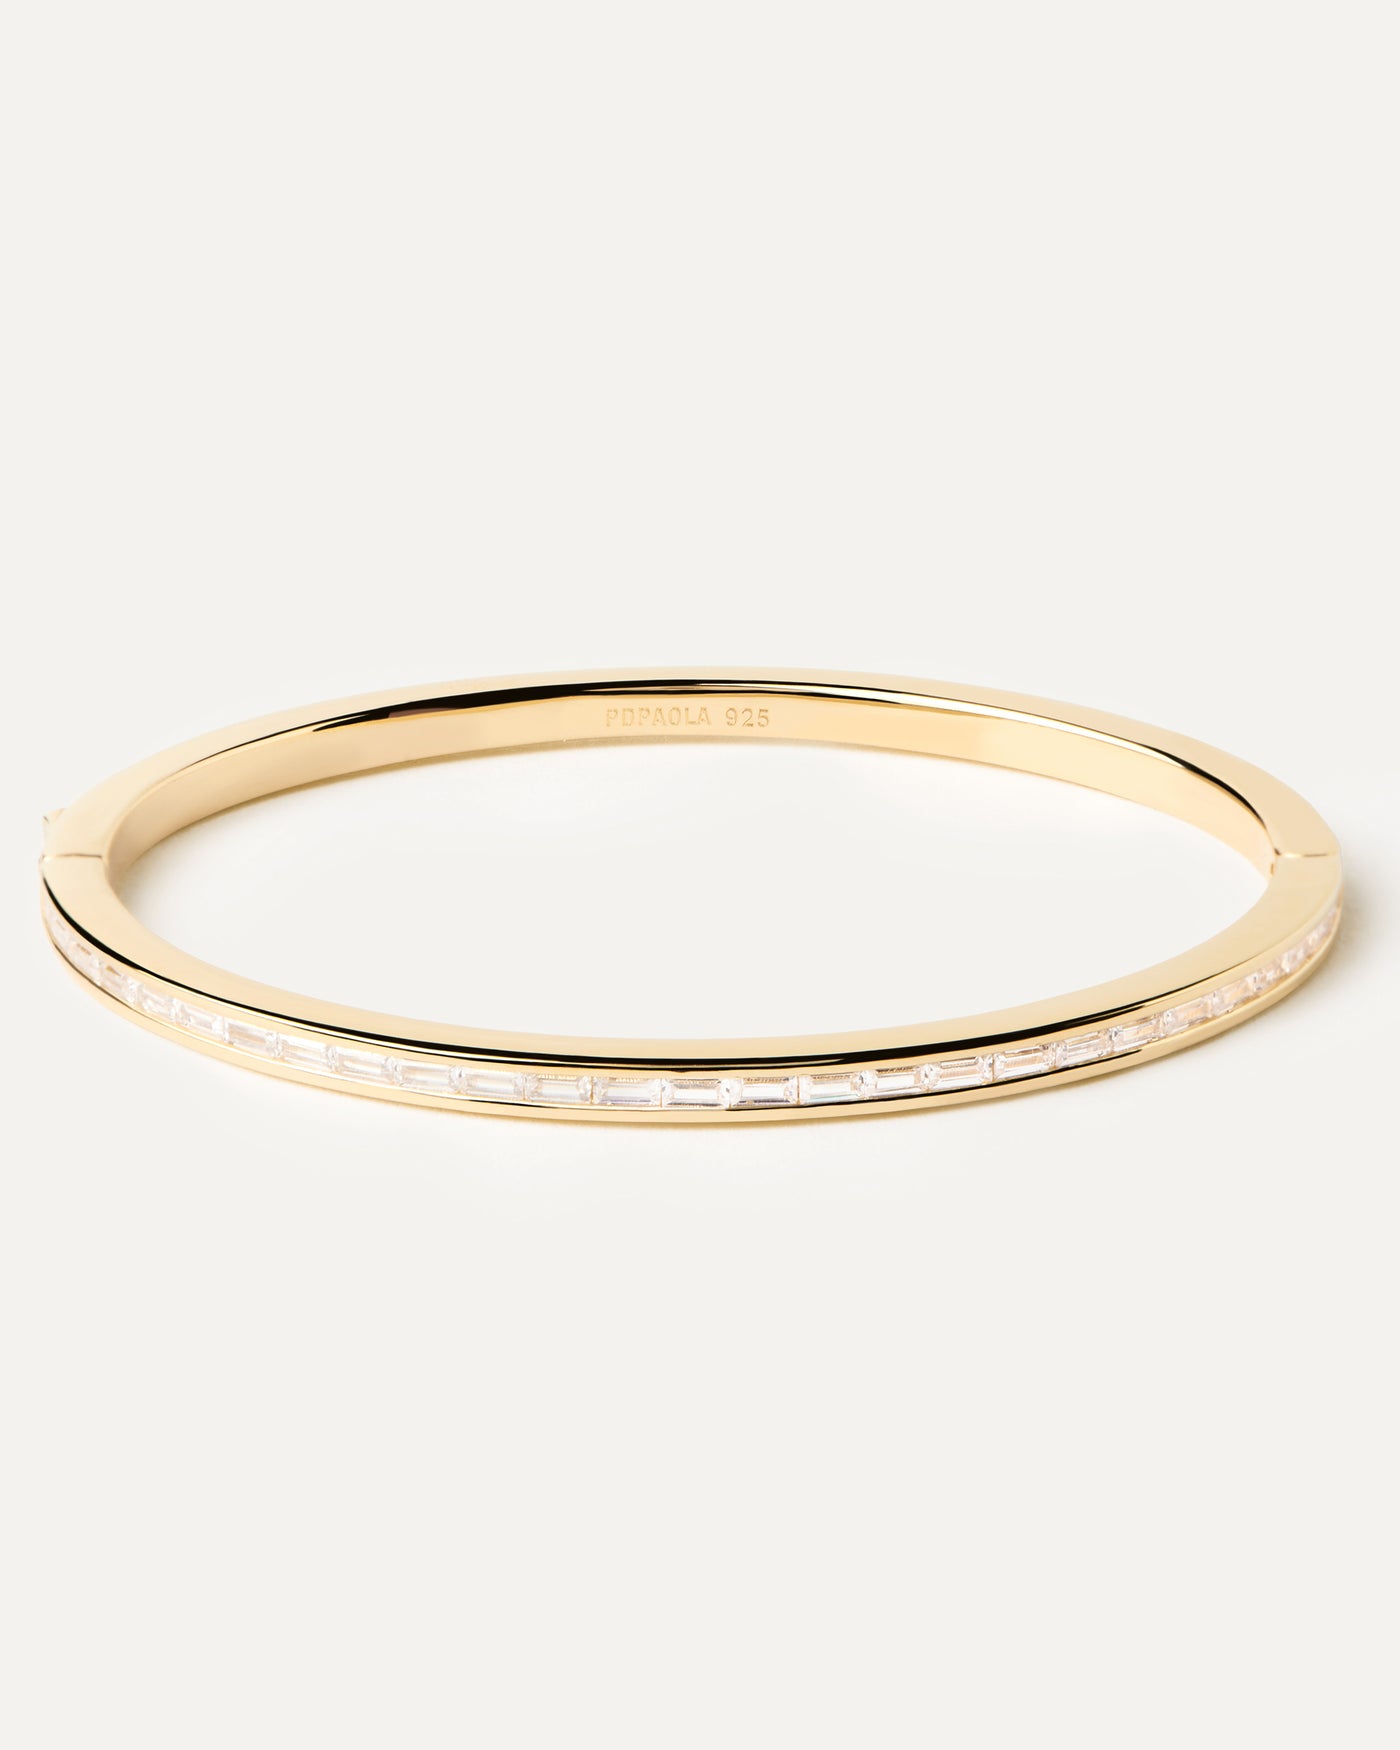 2023 Selection | Viena Bangle. Gold-plated hinged bangle with a band of rectangular cut white zirconia. Get the latest arrival from PDPAOLA. Place your order safely and get this Best Seller. Free Shipping.